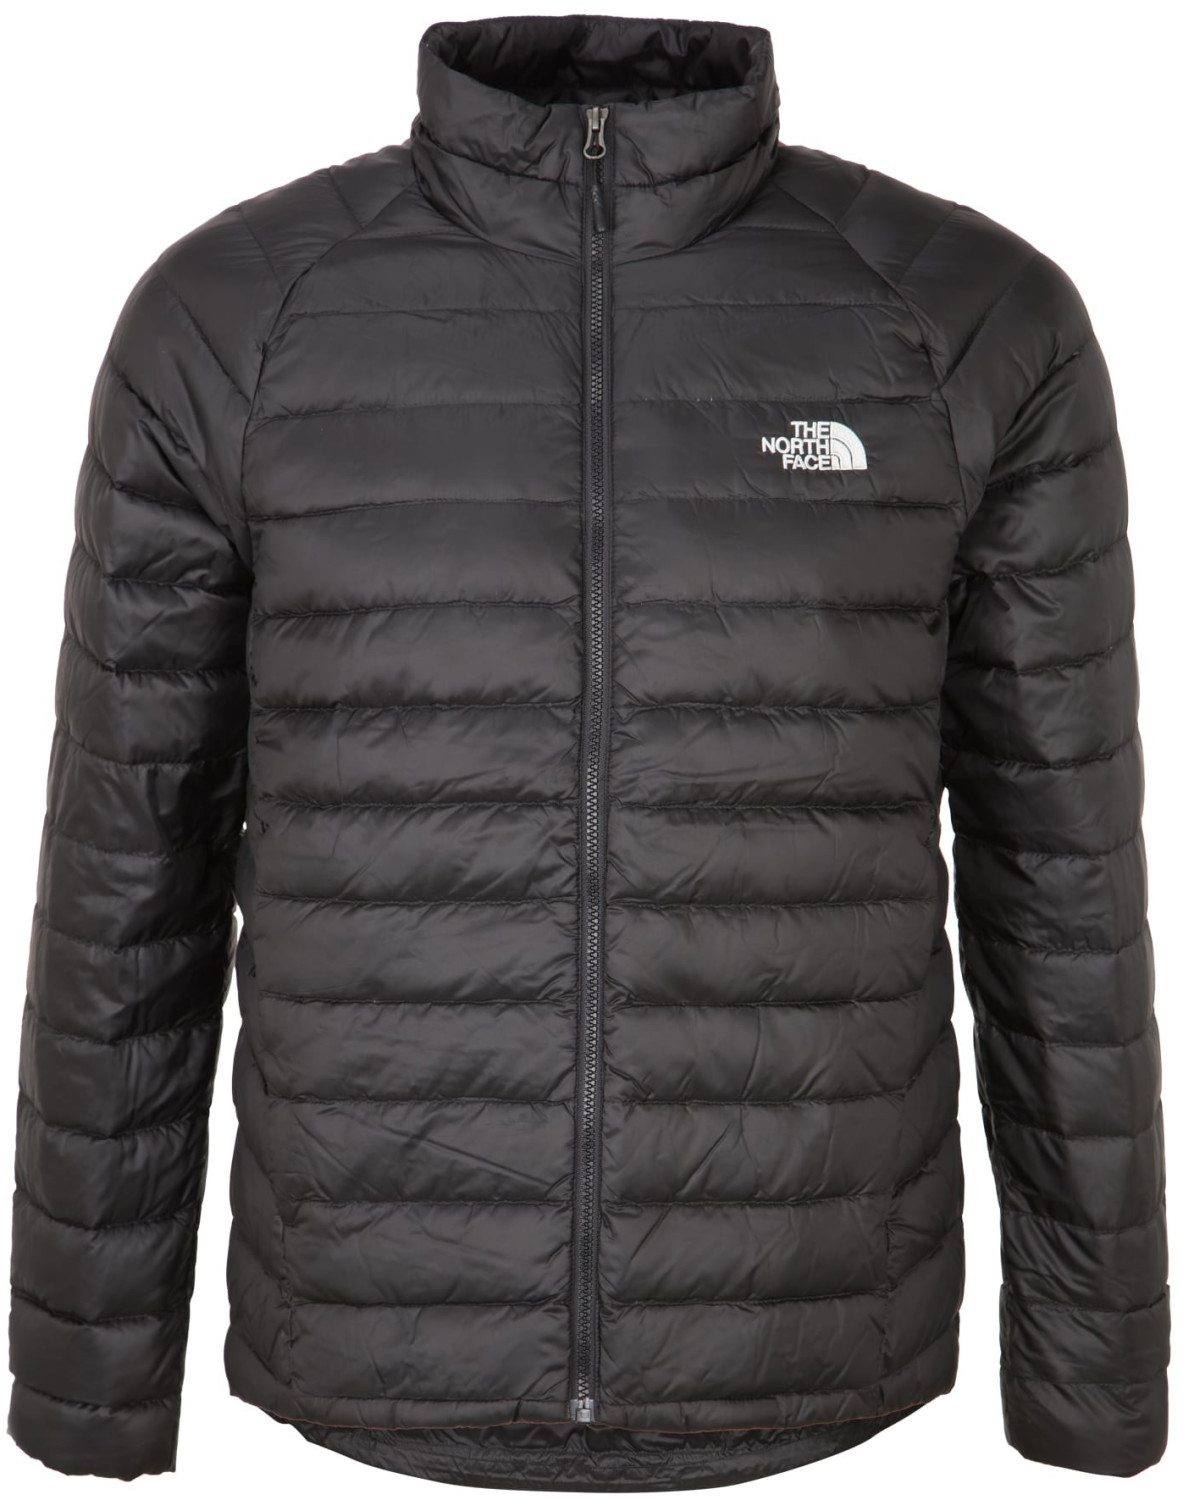 Buy The North Face Trevail Jacket tnf black from £156.00 (Today) – Best ...